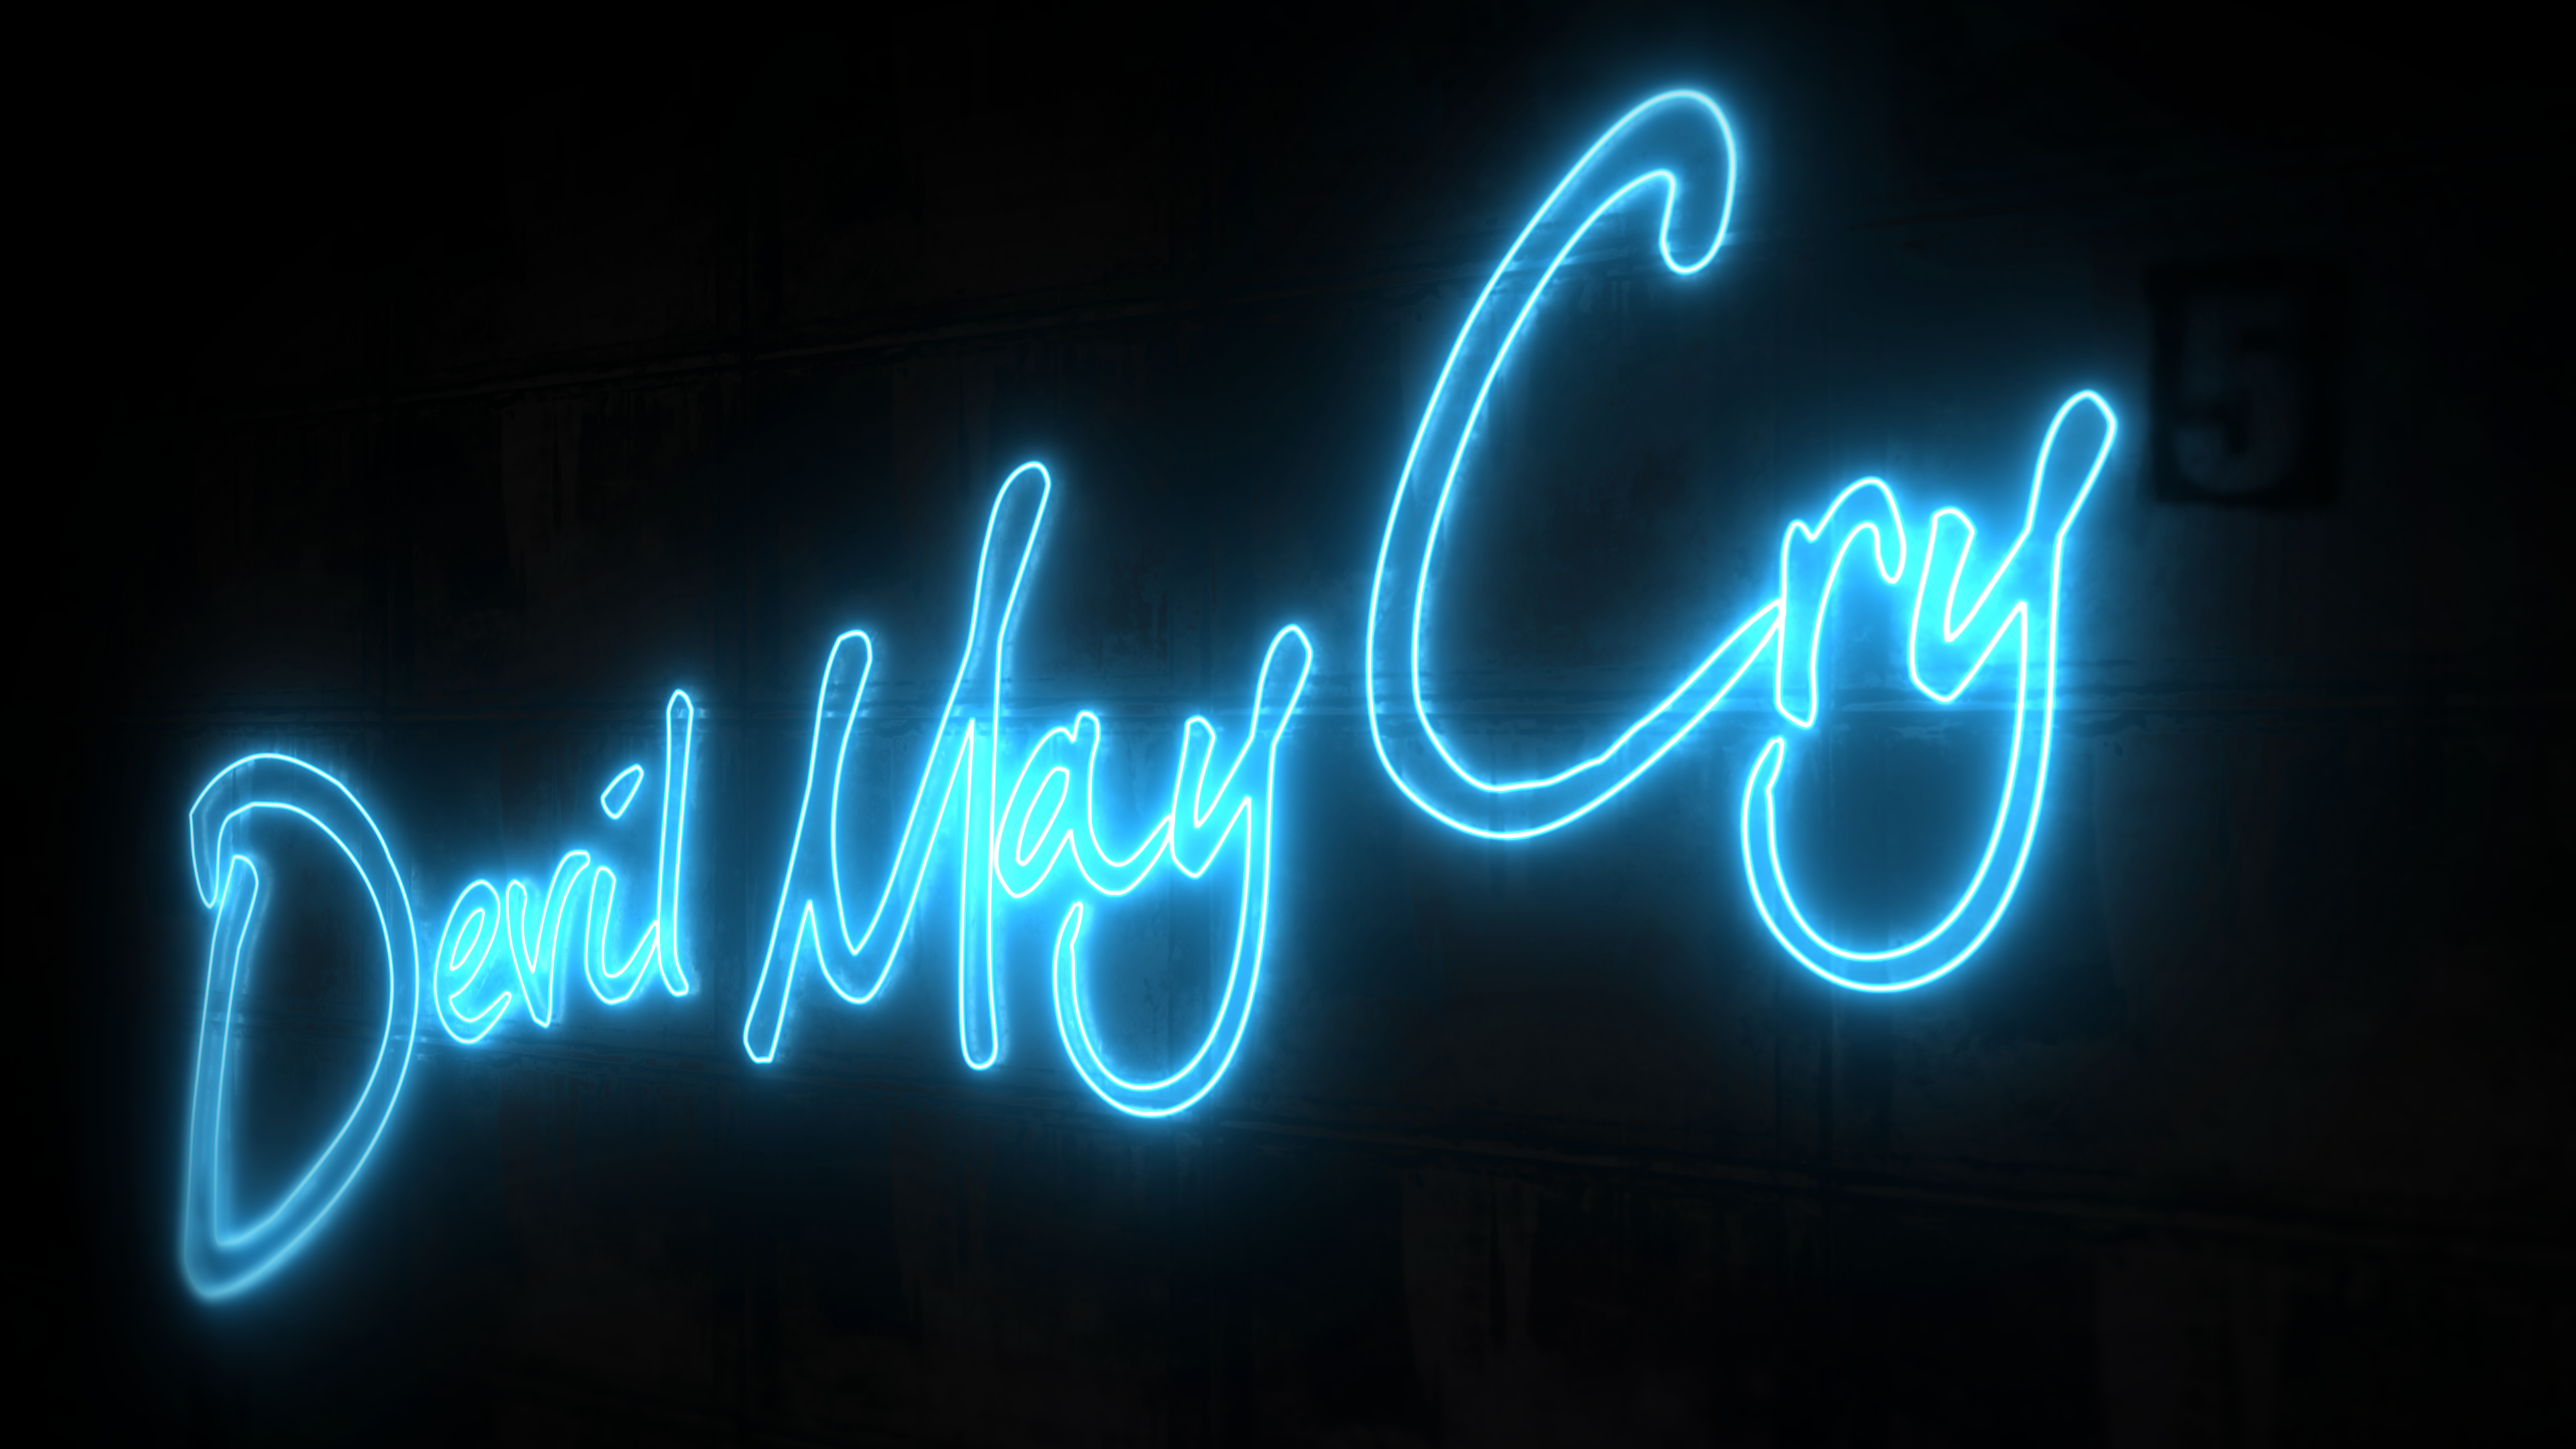 Creativea Wallpaper I Made Inspired By Dmc5 Trailer - Neon Sign , HD Wallpaper & Backgrounds